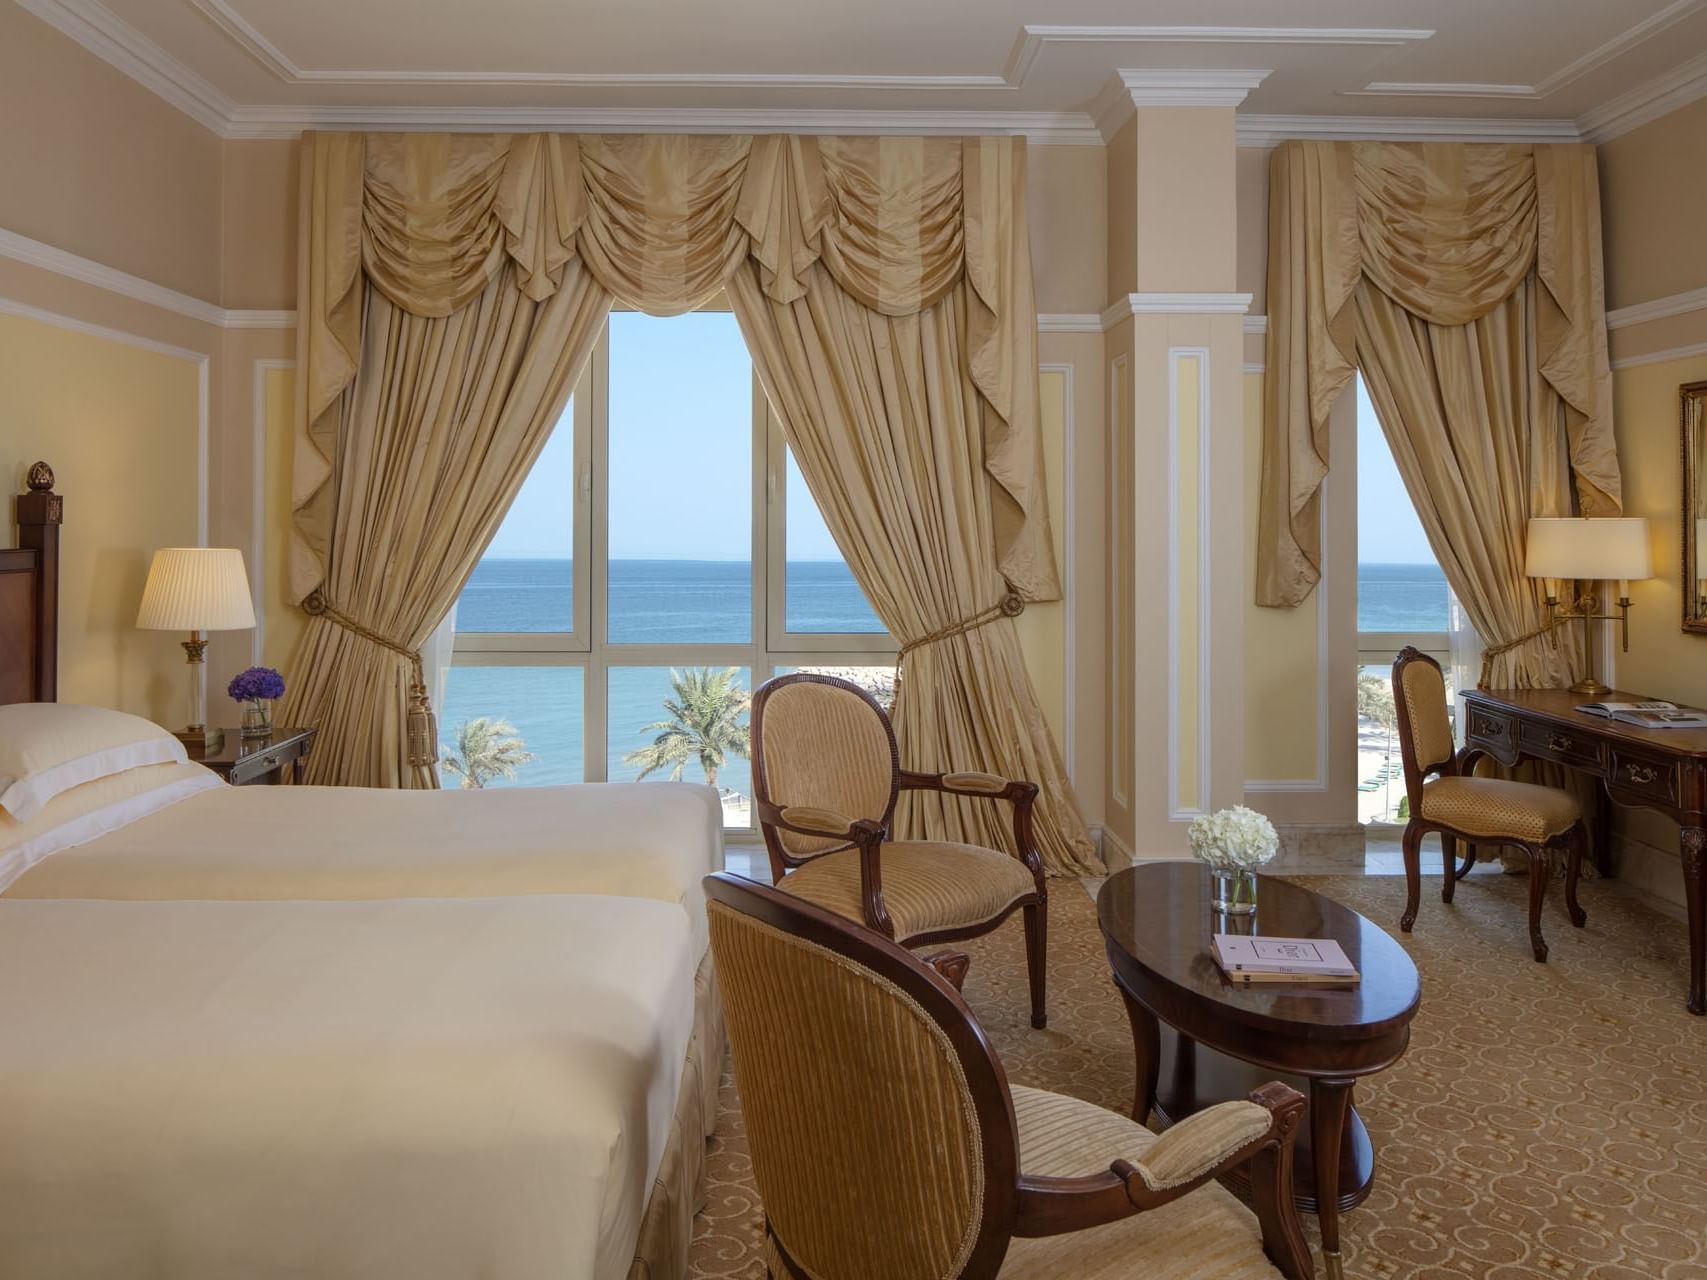 King bed in a suite with a sea view at The Regency Hotel